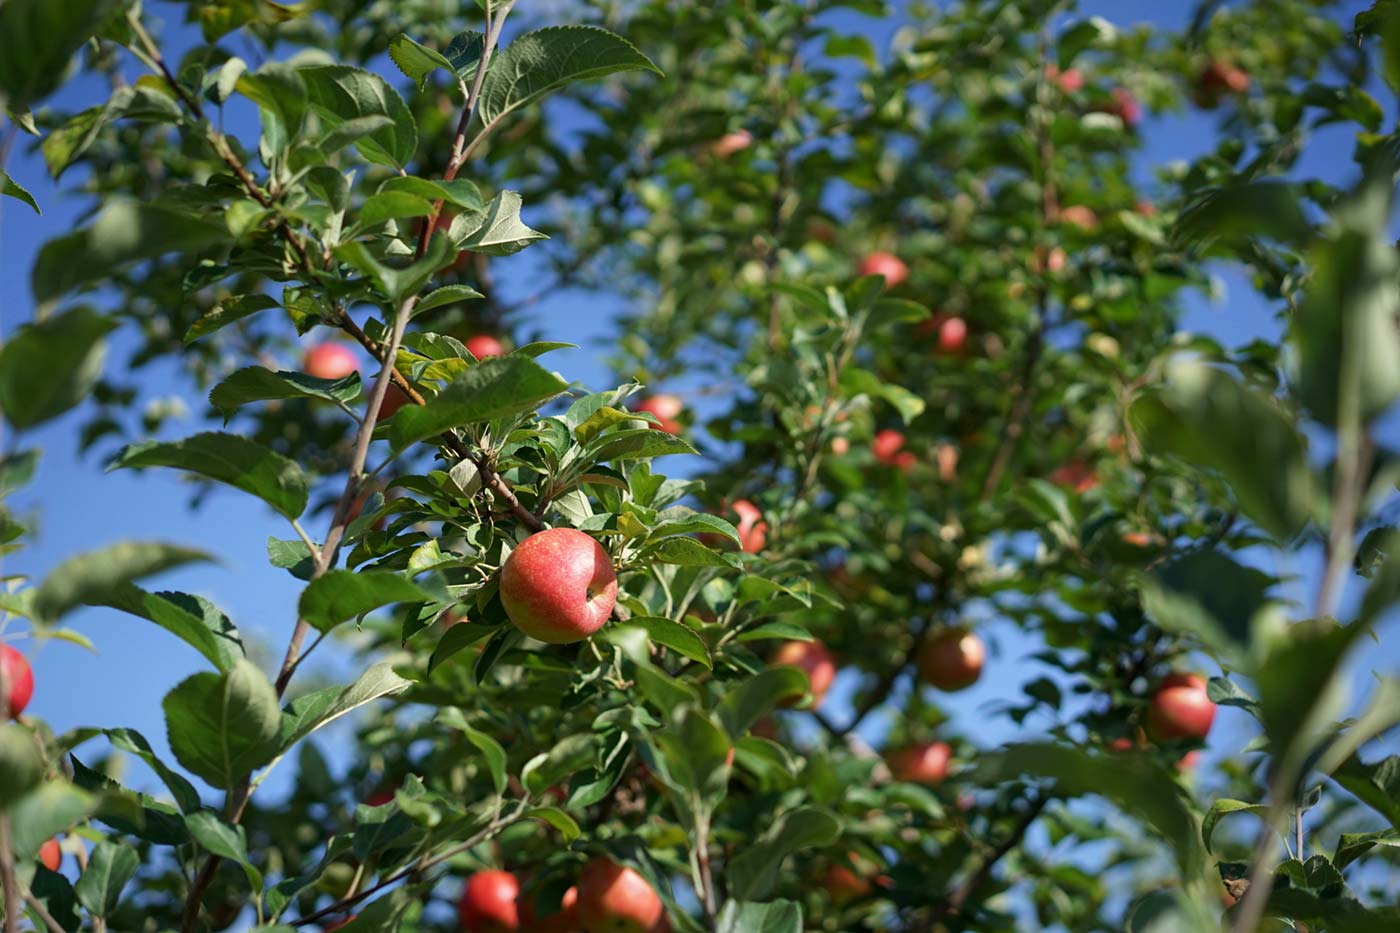 Several Columbus-area orchards and farms offer pick-your-own apples at this time of year.